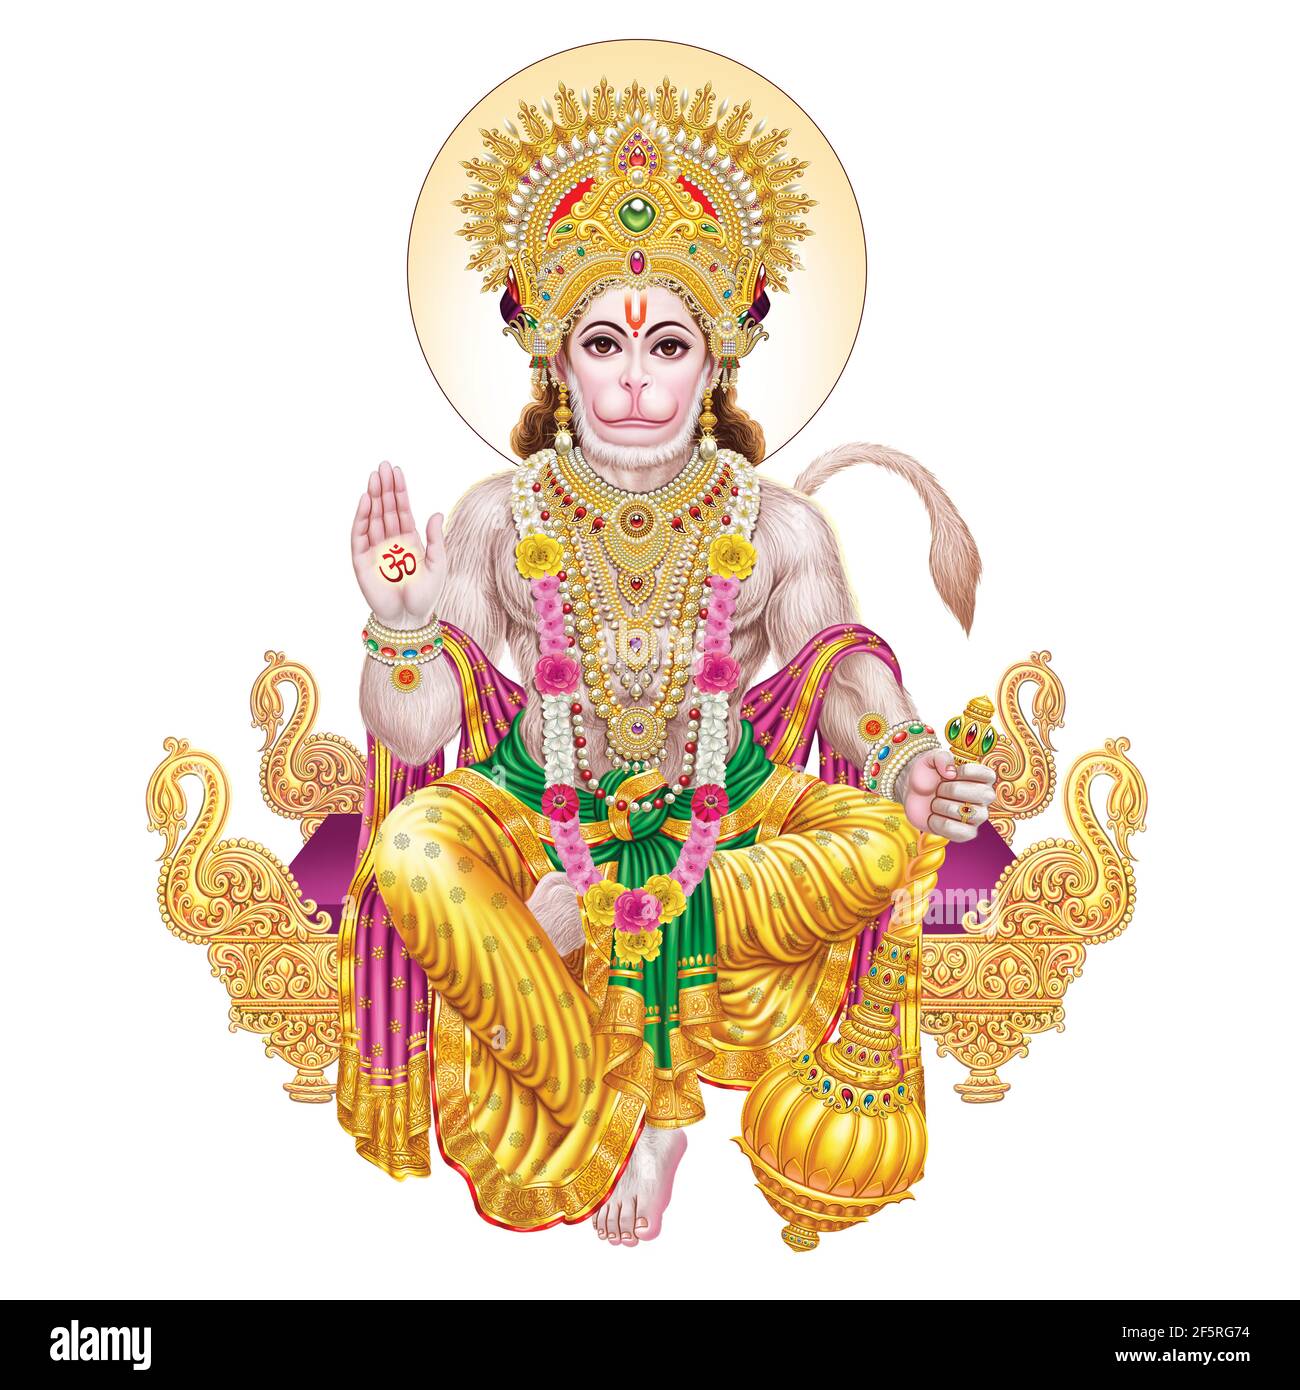 Lord hanuman Cut Out Stock Images & Pictures - Alamy